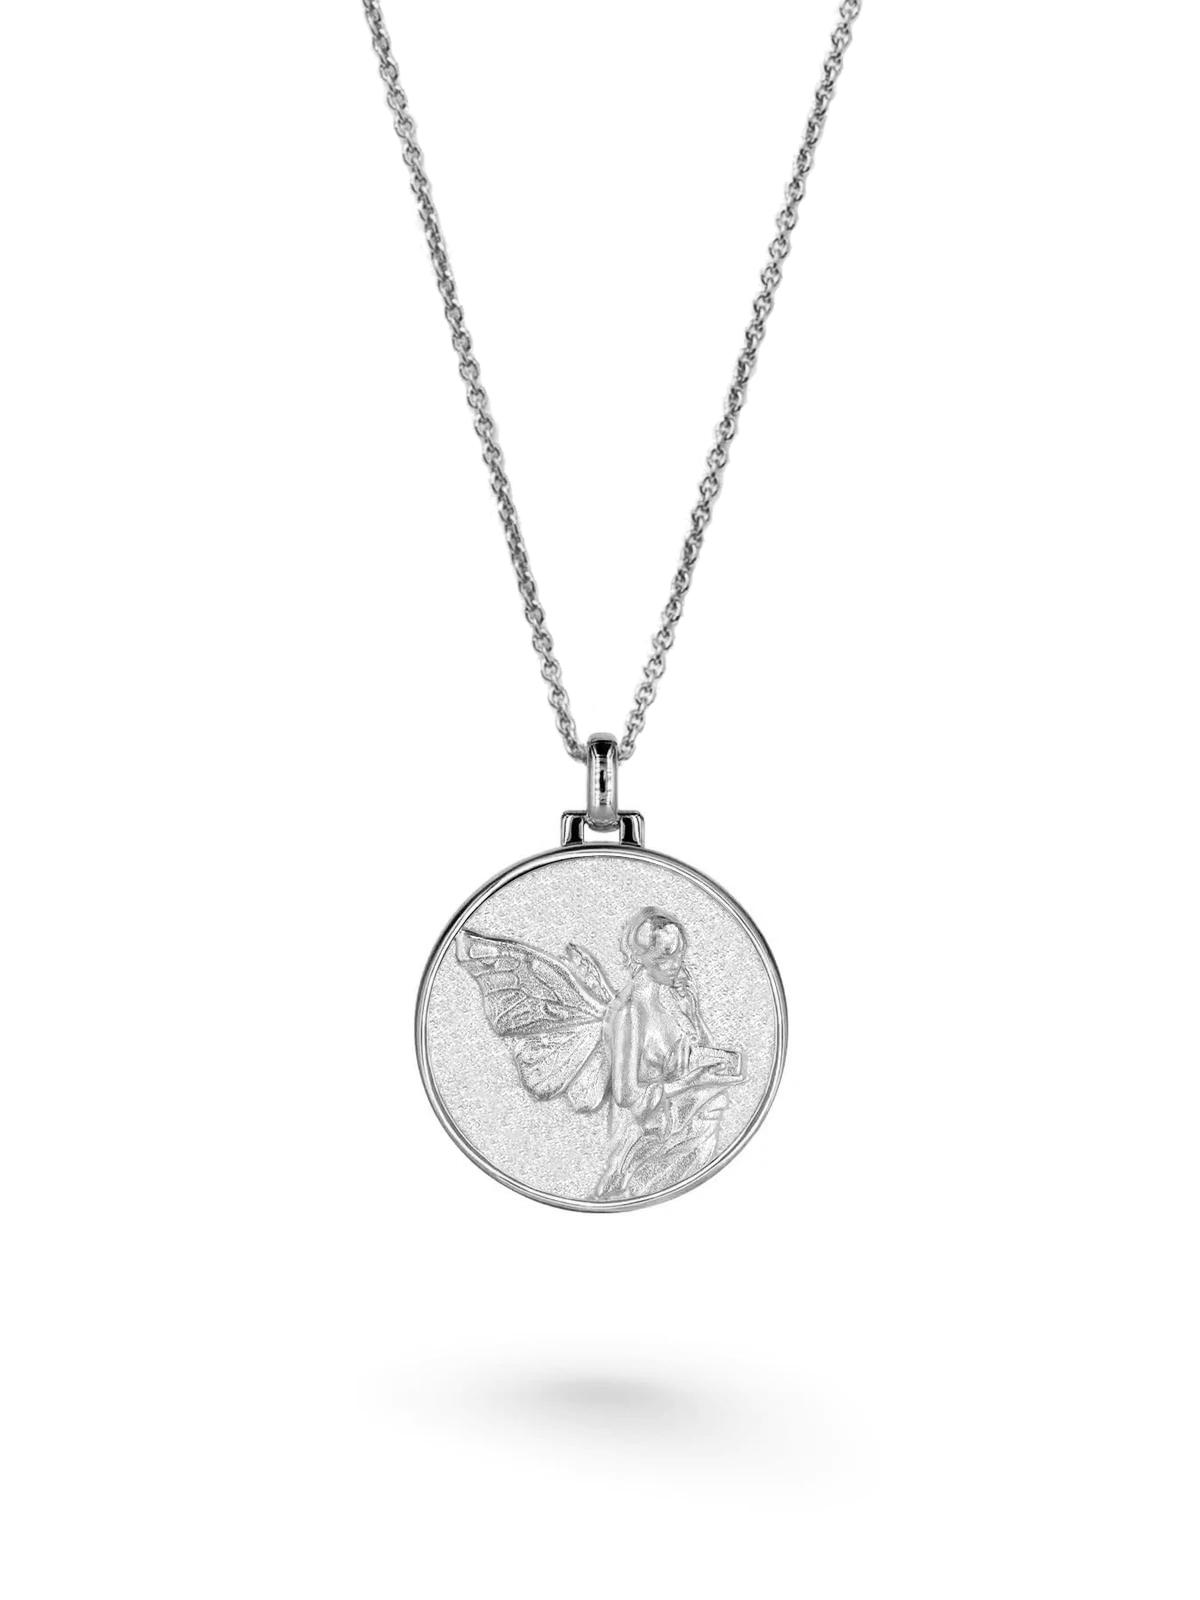 Psyche - Necklace - Silver